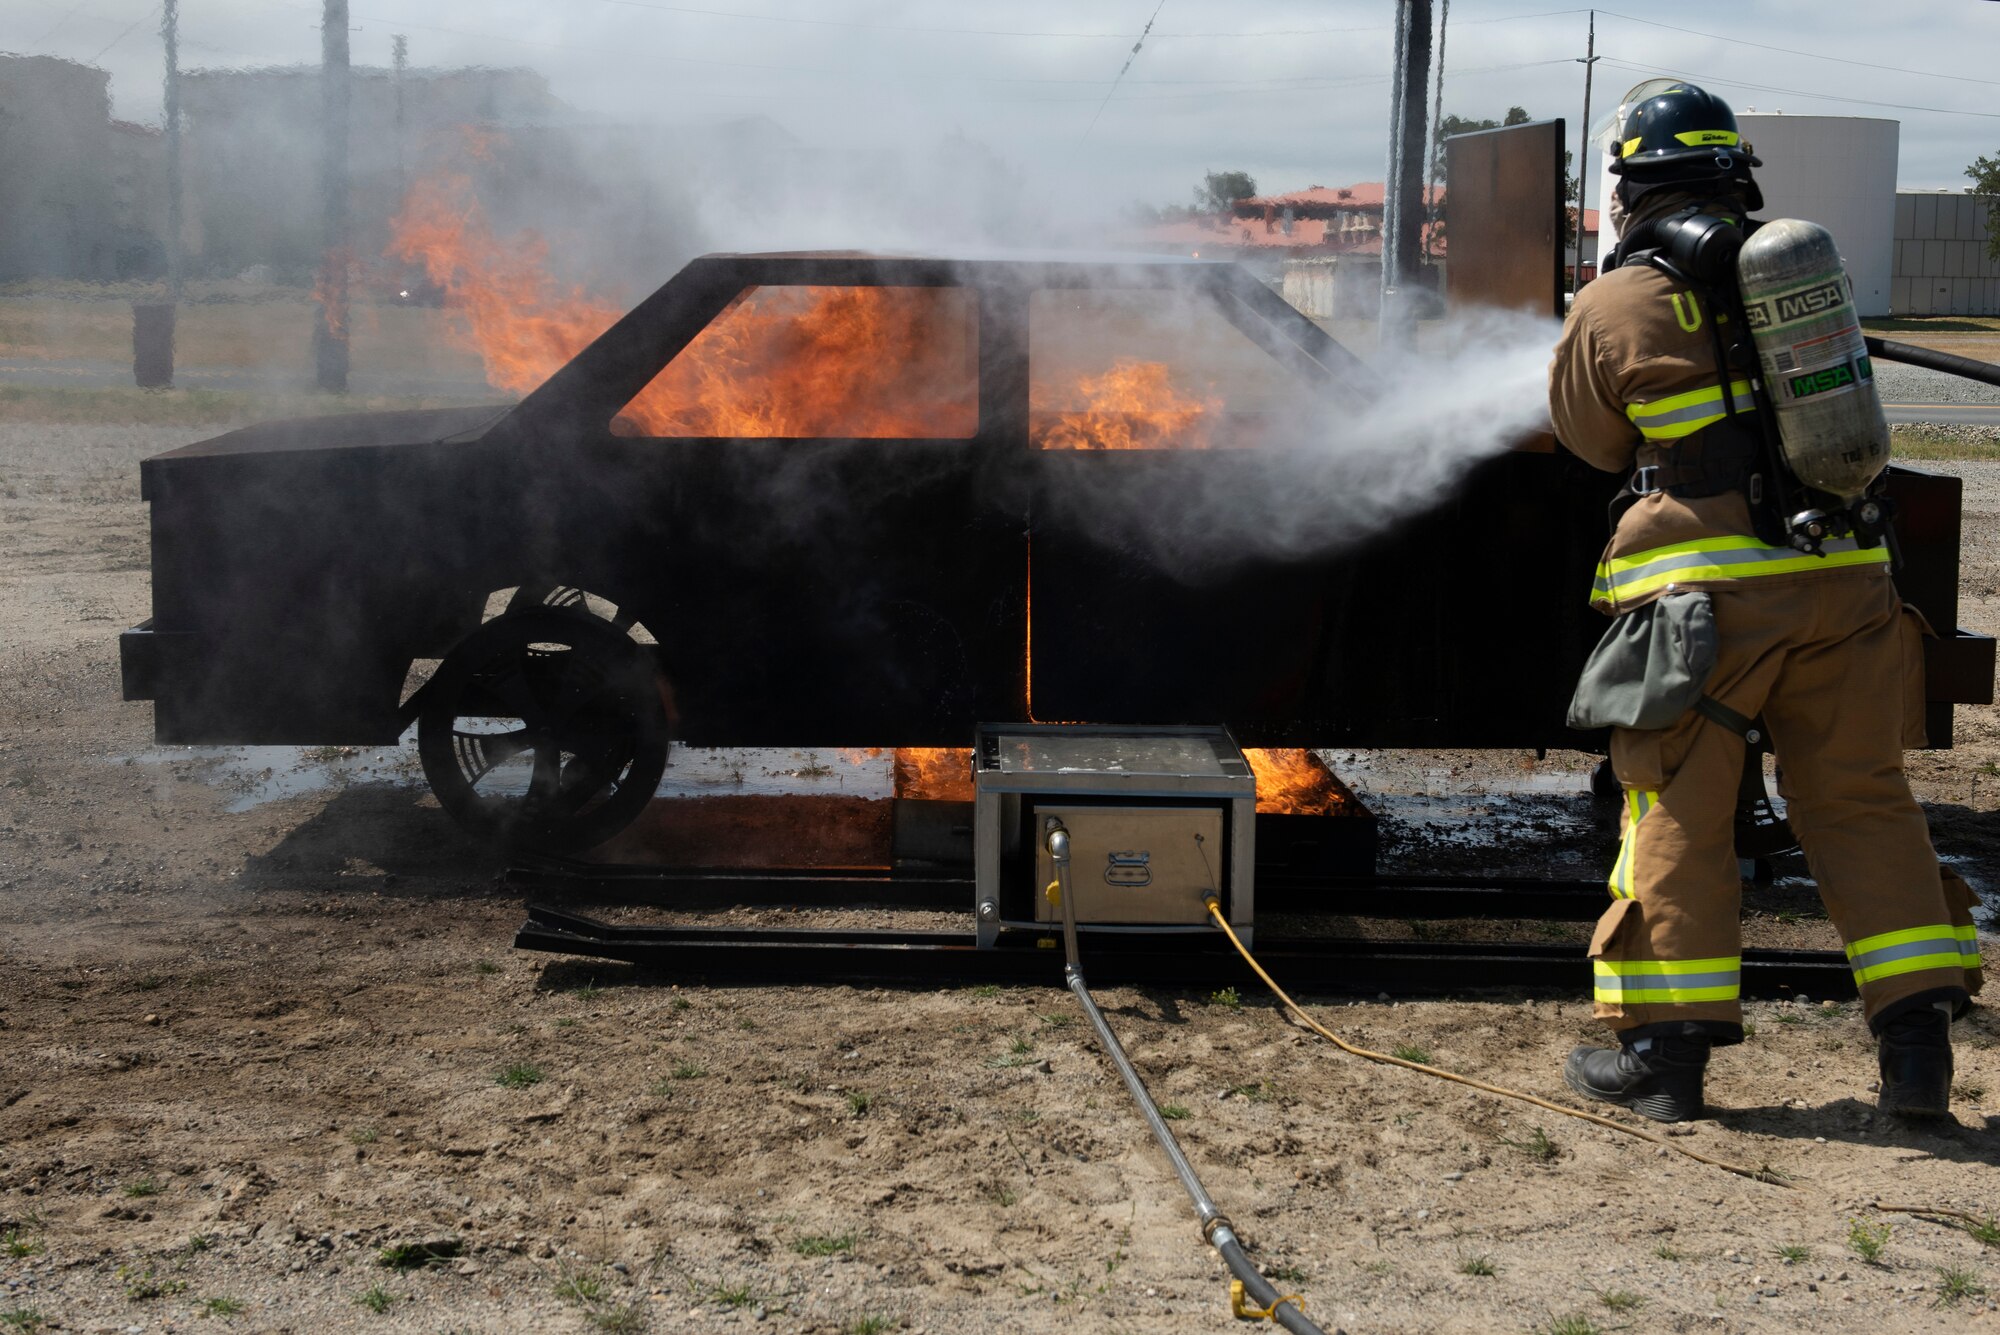 A Firefighter assigned to the 60th Civil Engineer Squadron works to extinguish a fire May 9, 2019 during a training exercise at Travis Air Force Base, California. The base conducted a weeklong exercise to evaluate its ability to execute and sustain rapid global mobility operations. (U.S. Air Force photo by Tech. Sgt. James Hodgman)